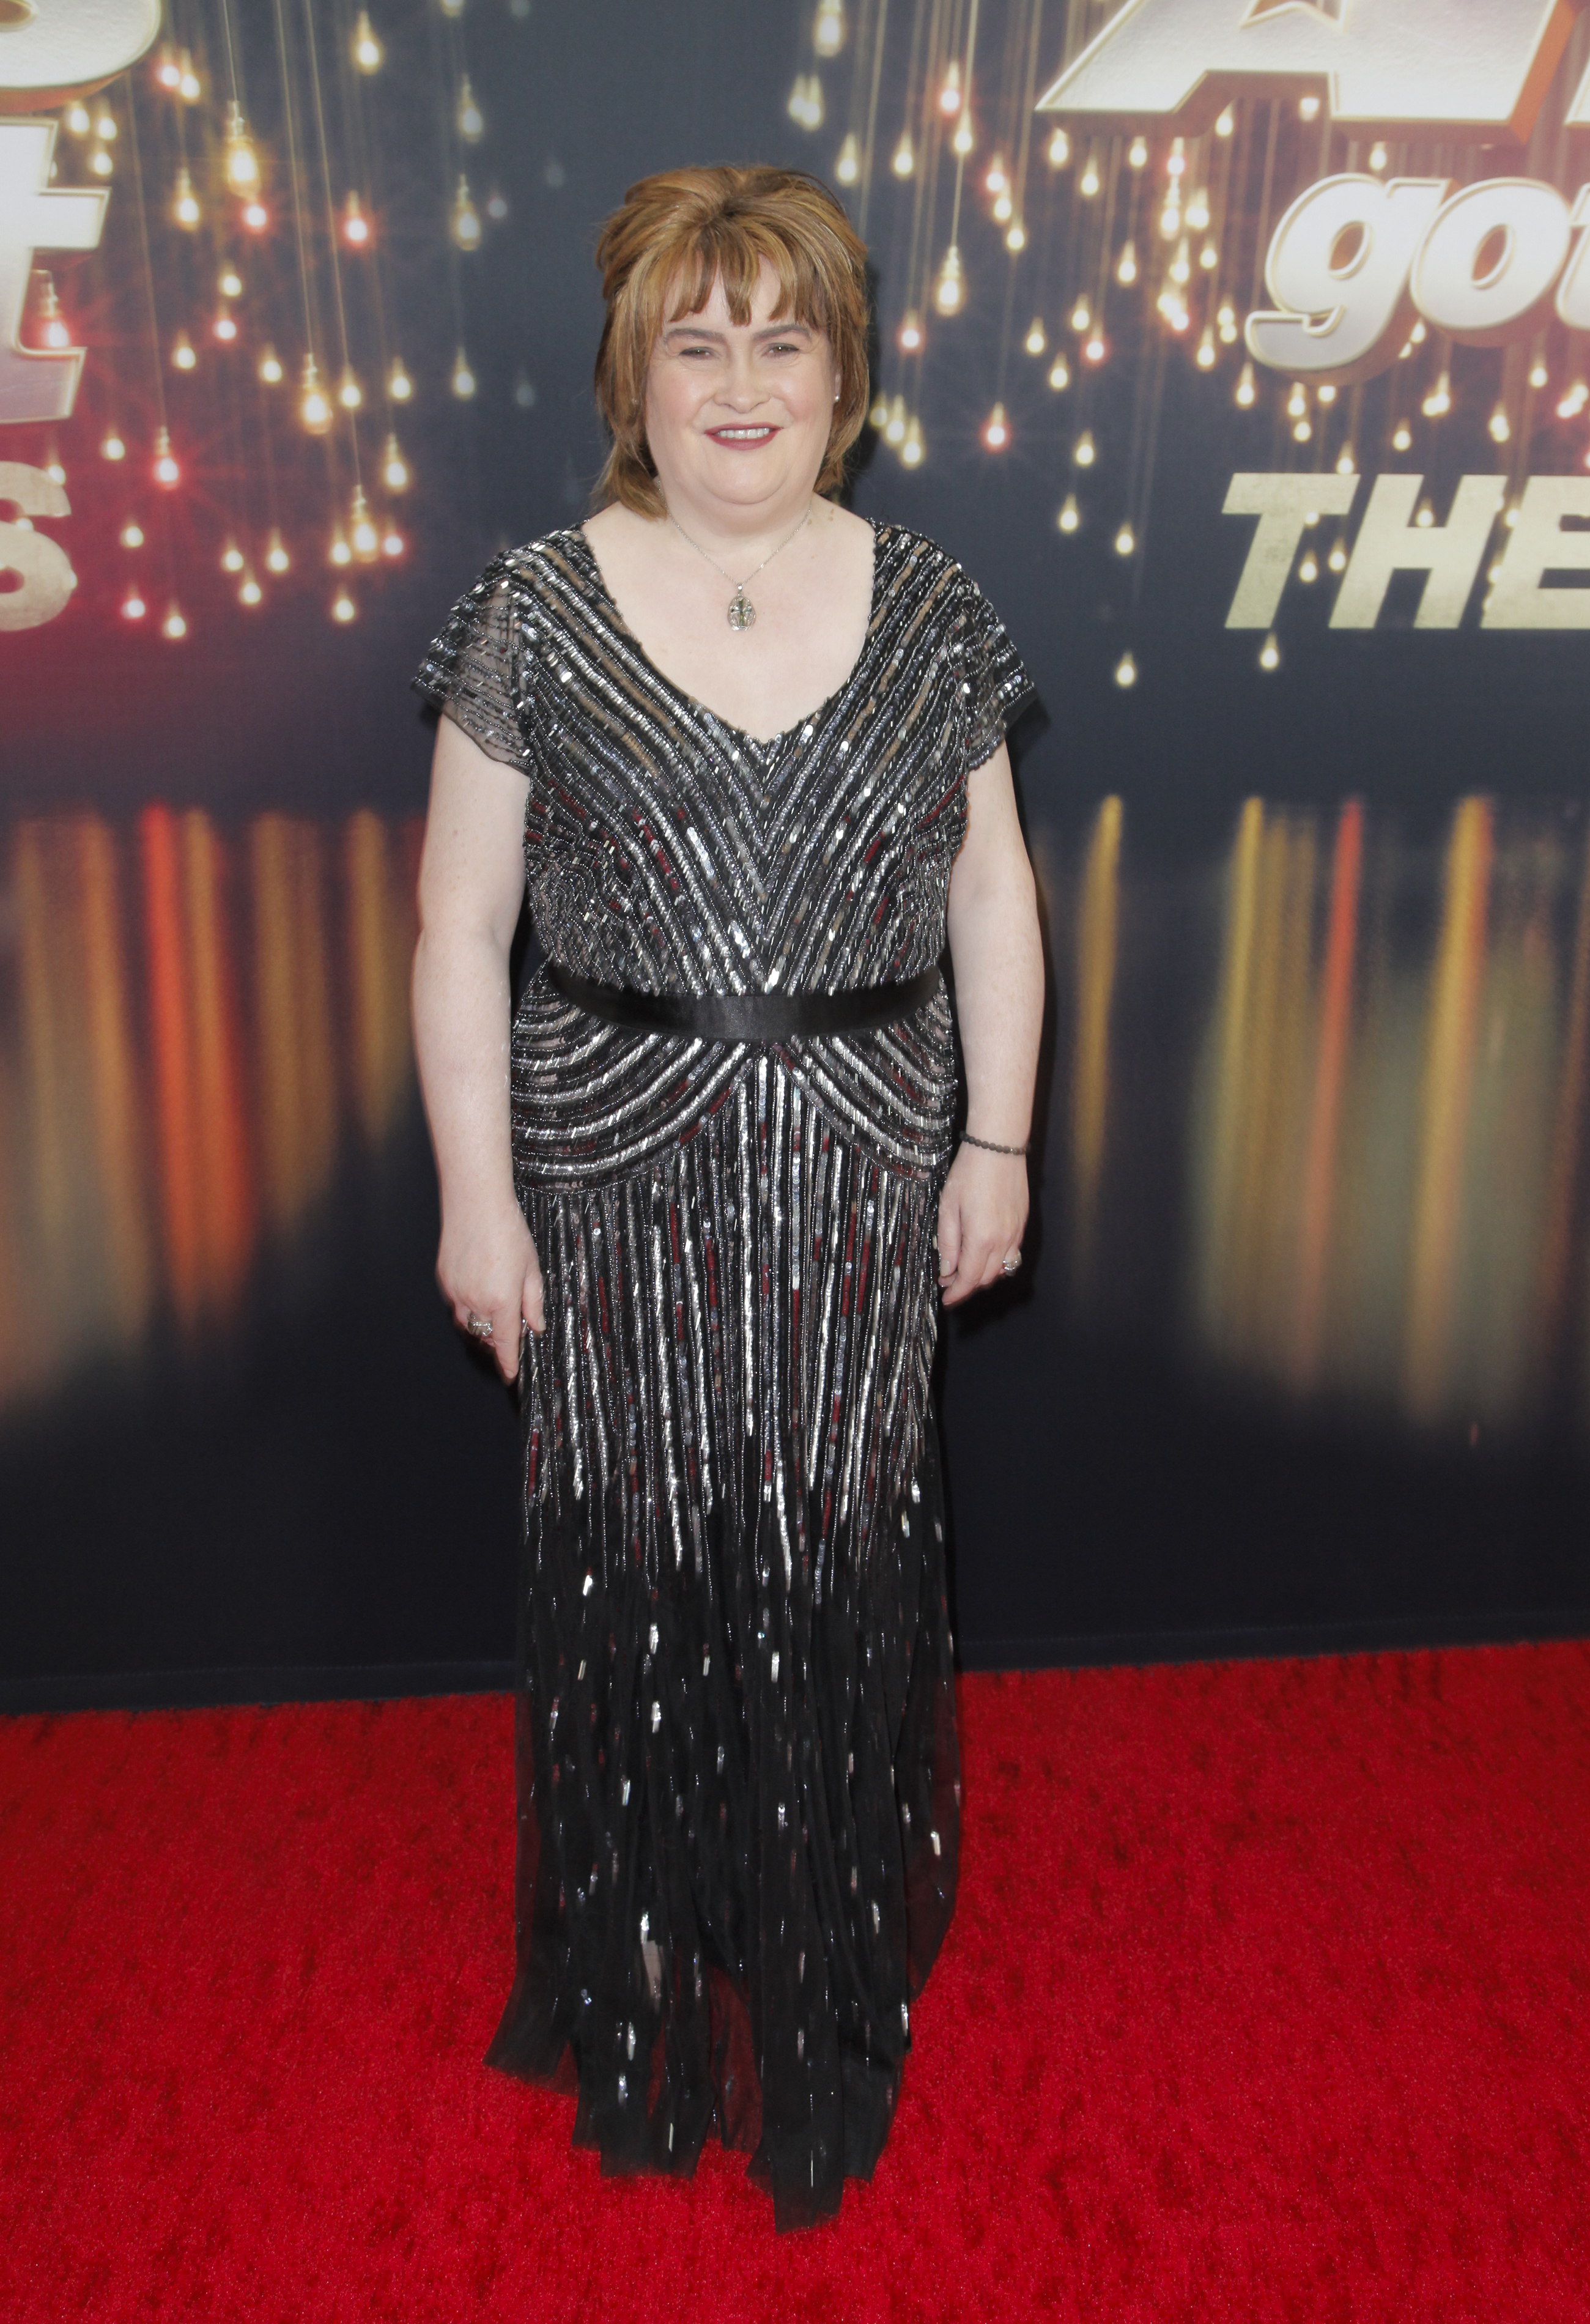 Susan Boyle attends the "America’s Got Talent: The Champions" finale on October 17, 2018 in Pasadena, California | Source: Getty Images